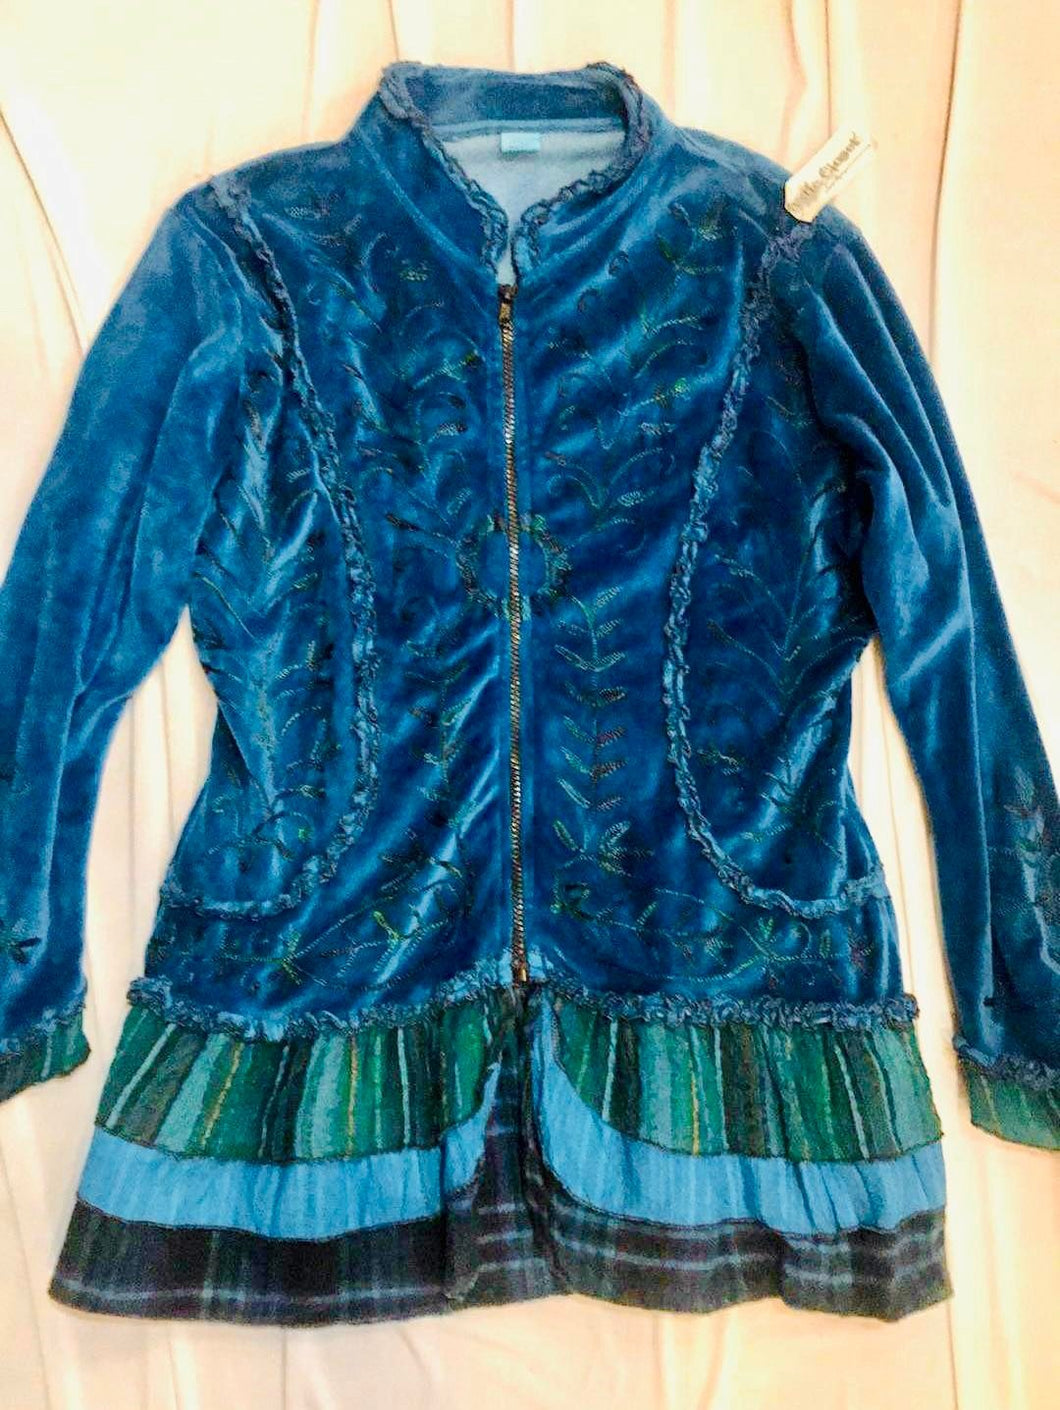 Velvet Embroidered Jacket with Ruffles